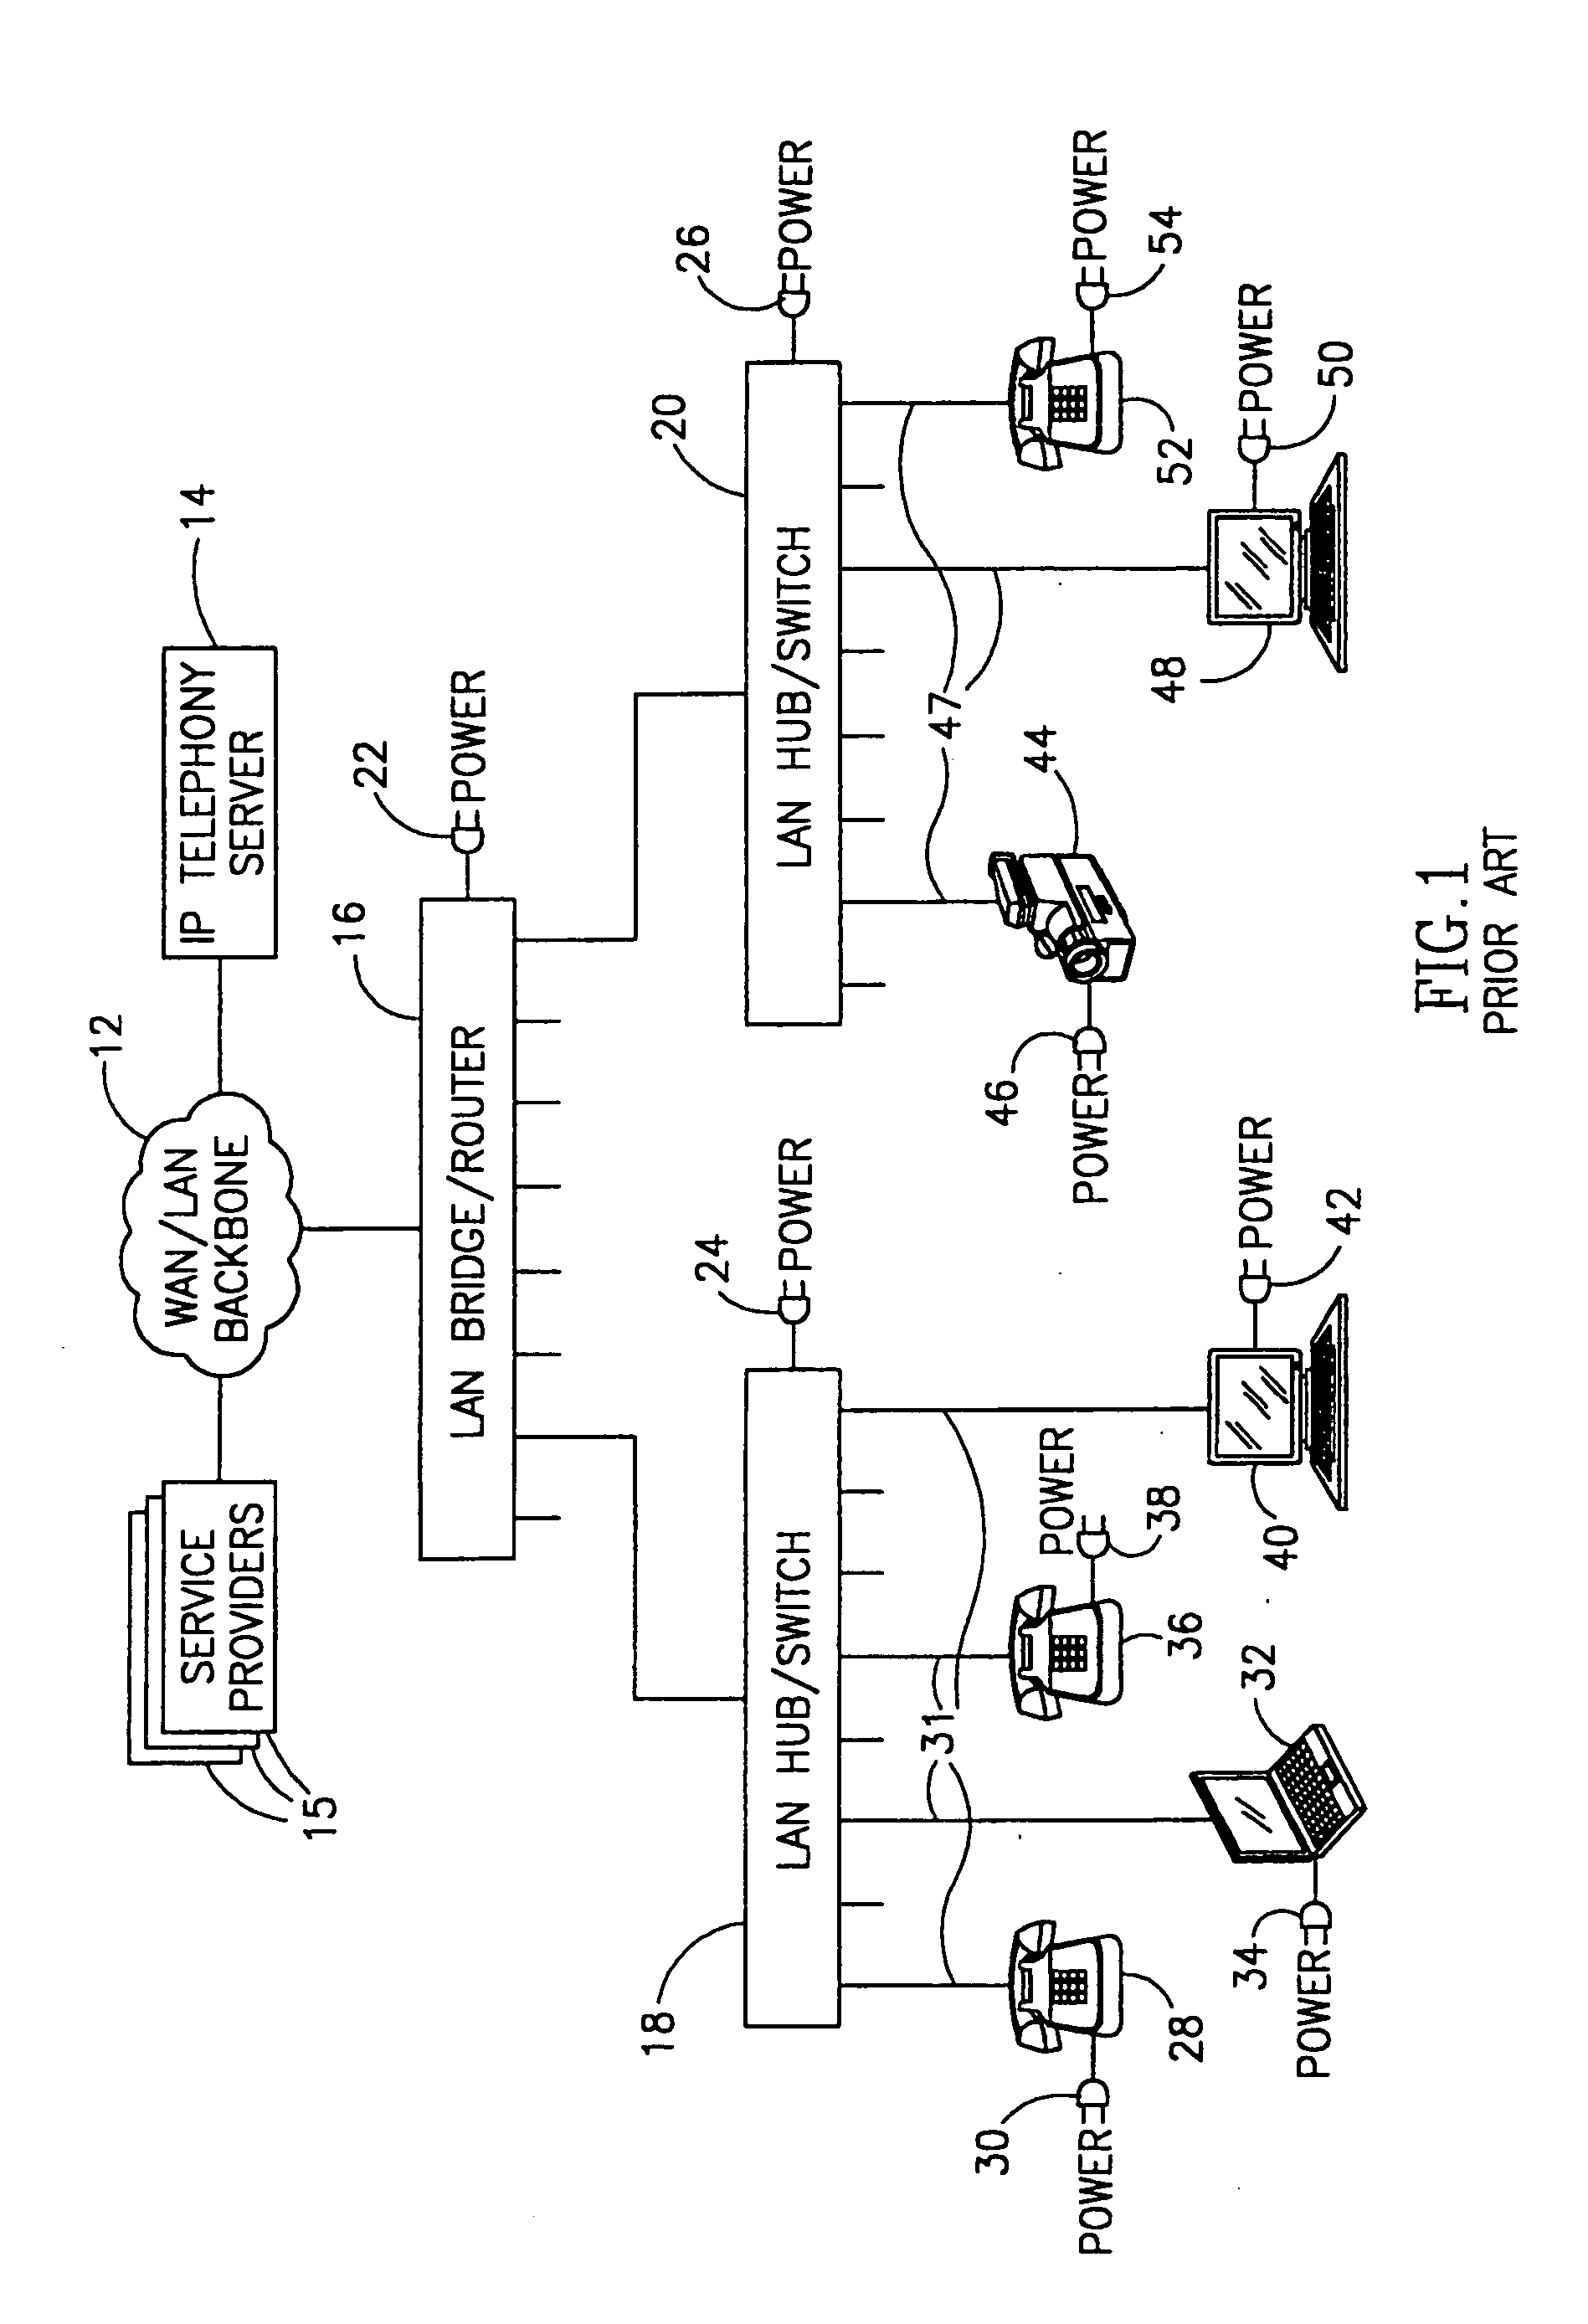 System for powering a switch over data communication cabling infrastructure